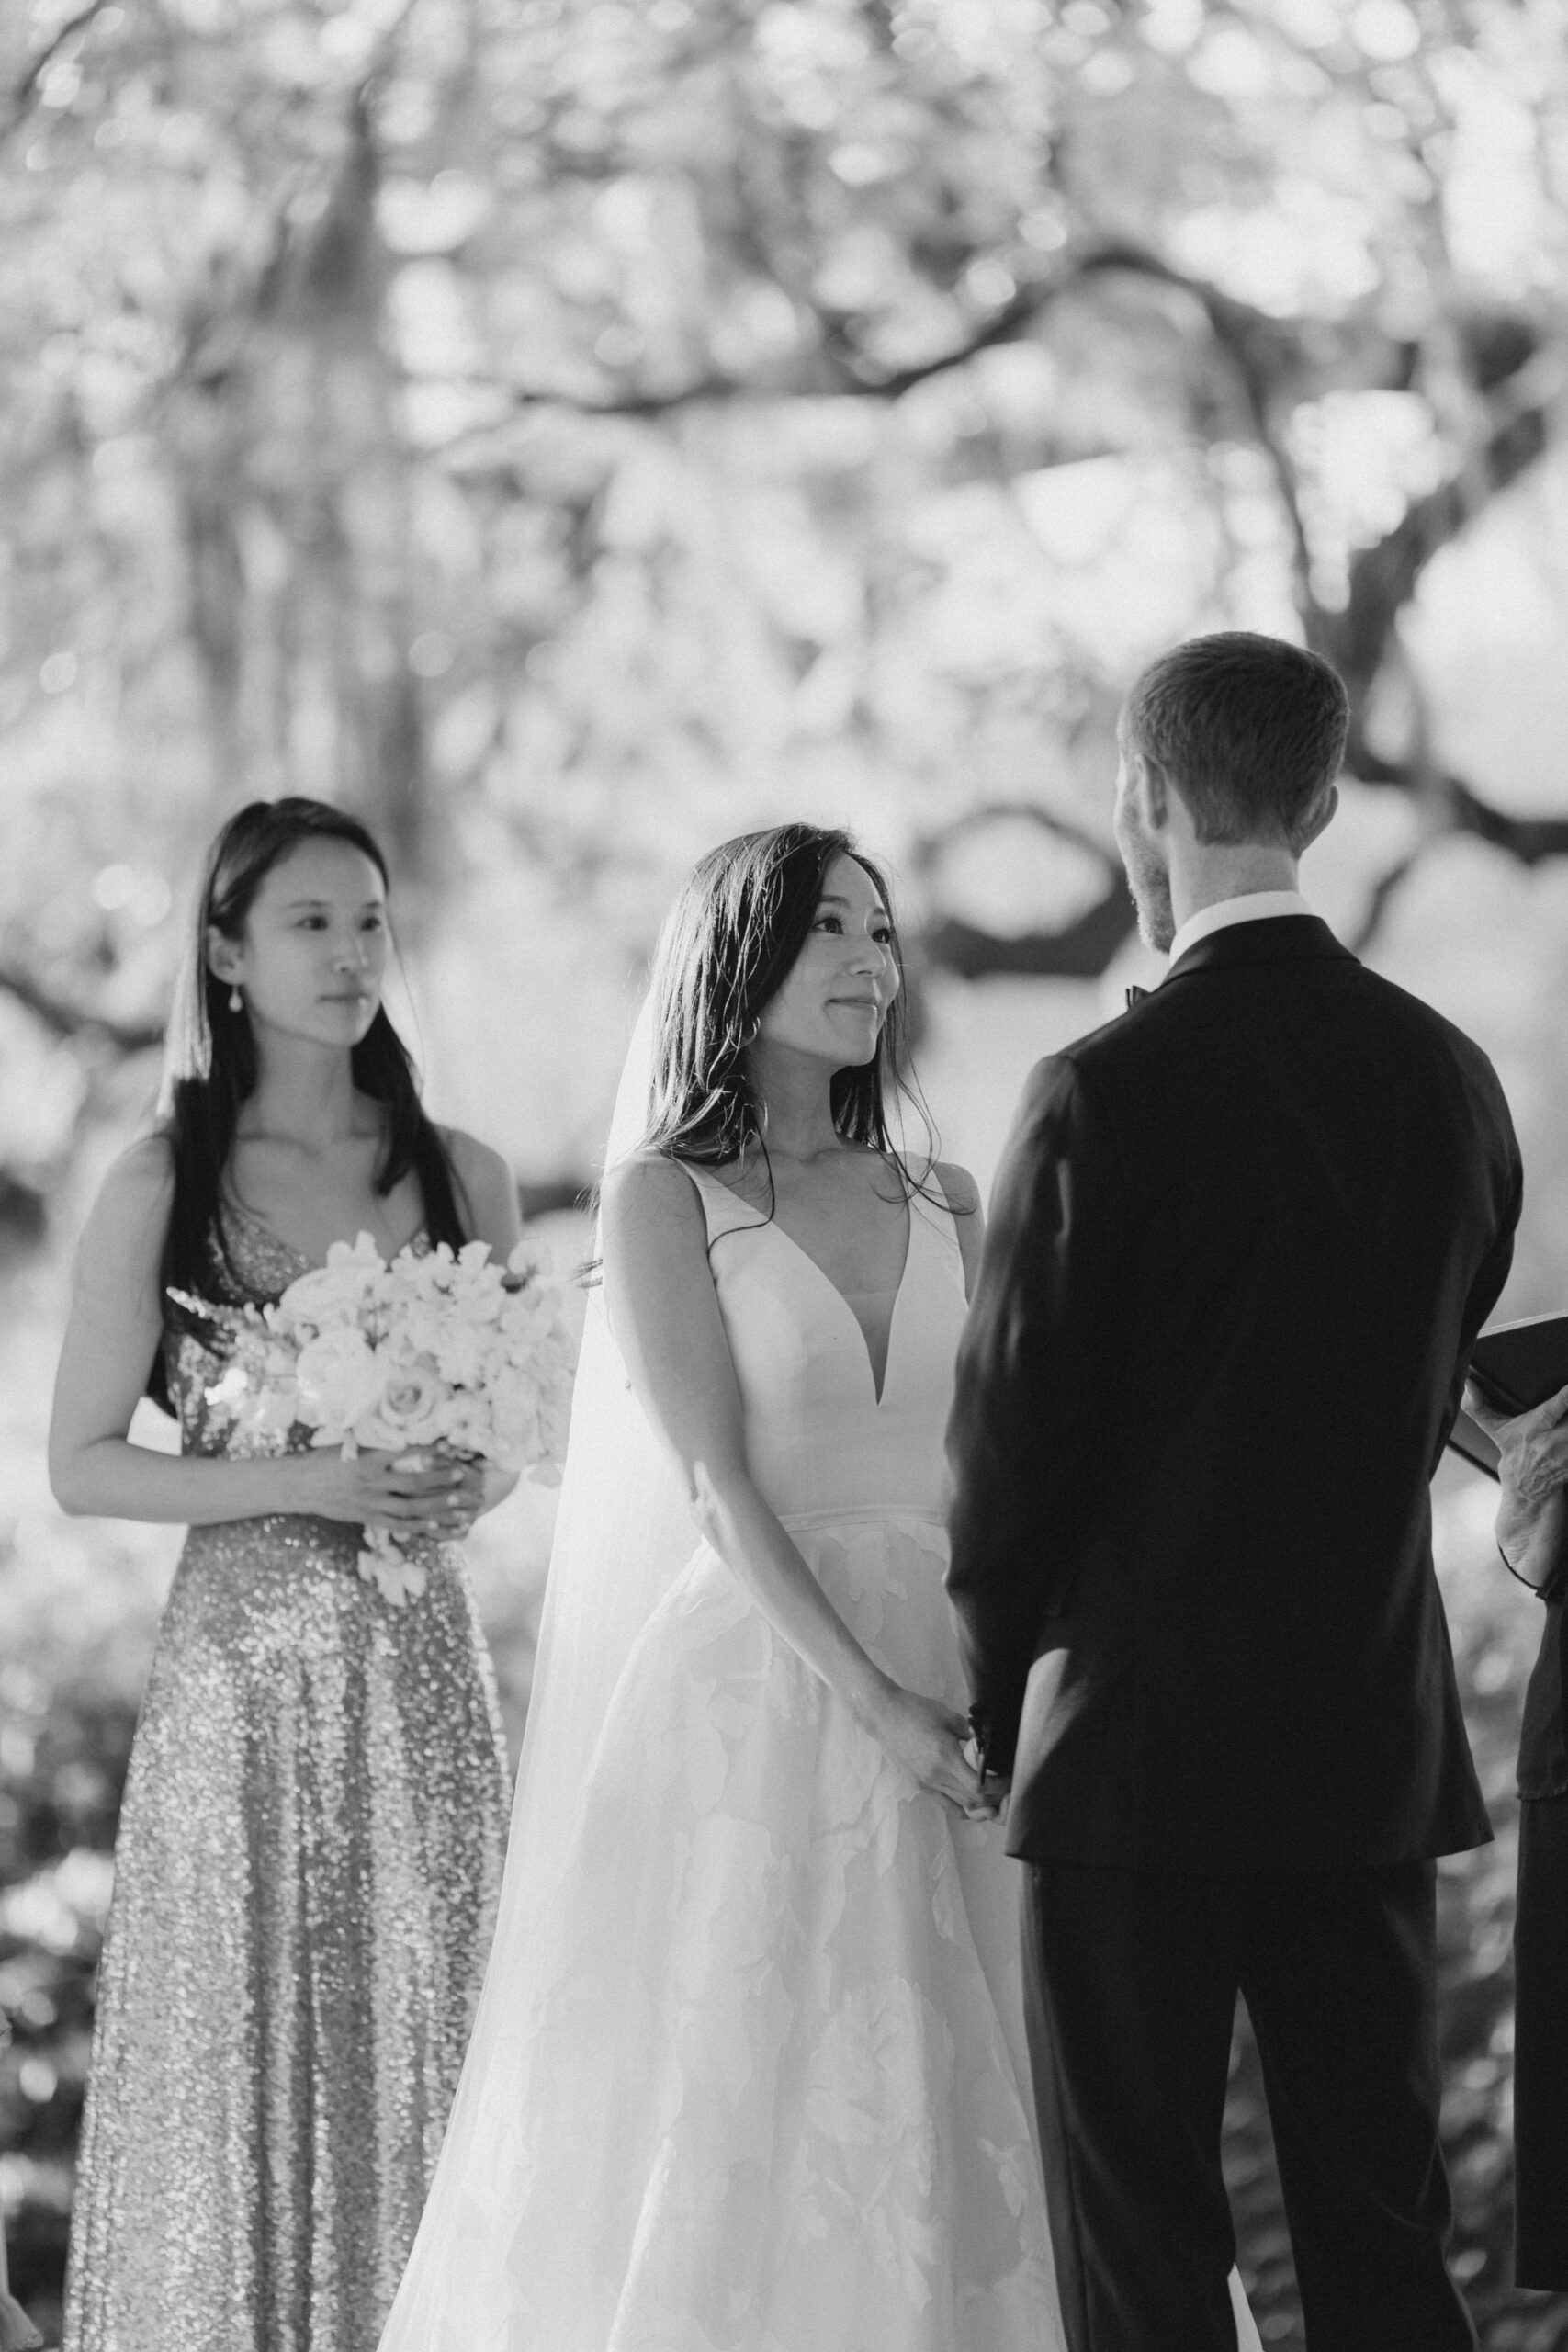 black and white photo of bride looking lovingly at groom during outdoor wedding ceremony. Destination wedding photographer. Kailee DiMeglio Photography.